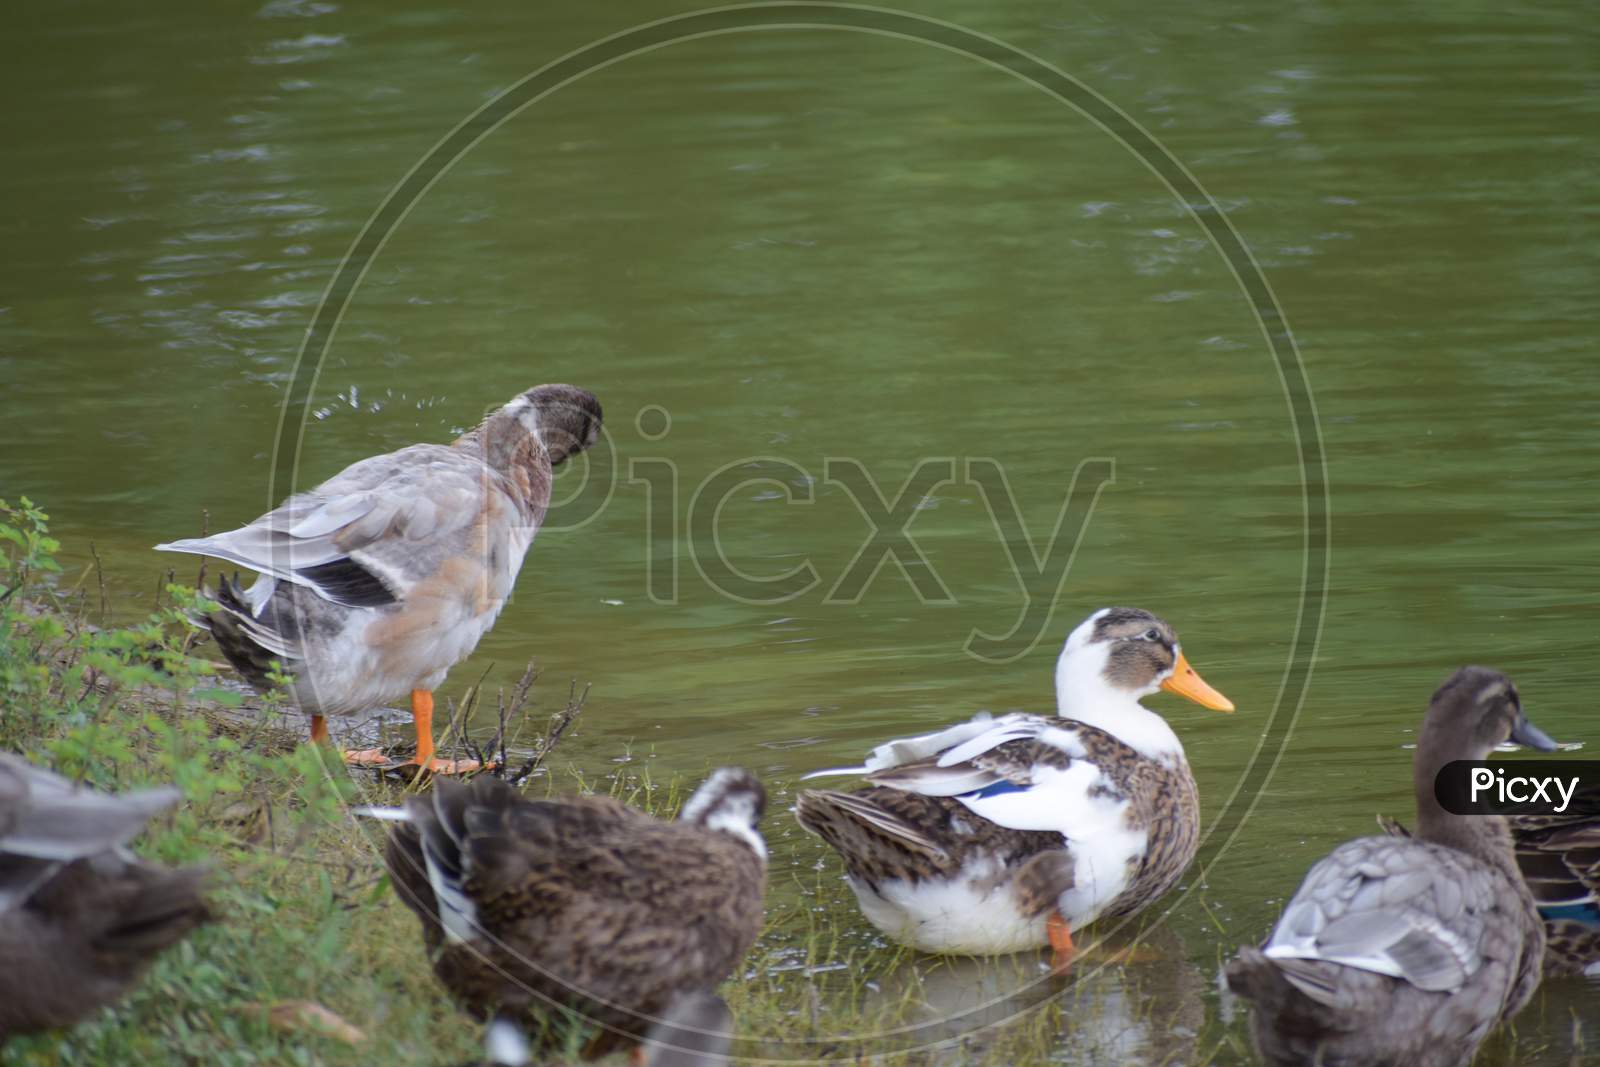 Picture Of Duck Is The Common Name For A Large Number Of Species In The Waterfowl Family Anatidae Which Also Includes Swans And Geese, Swimming In A Pond.